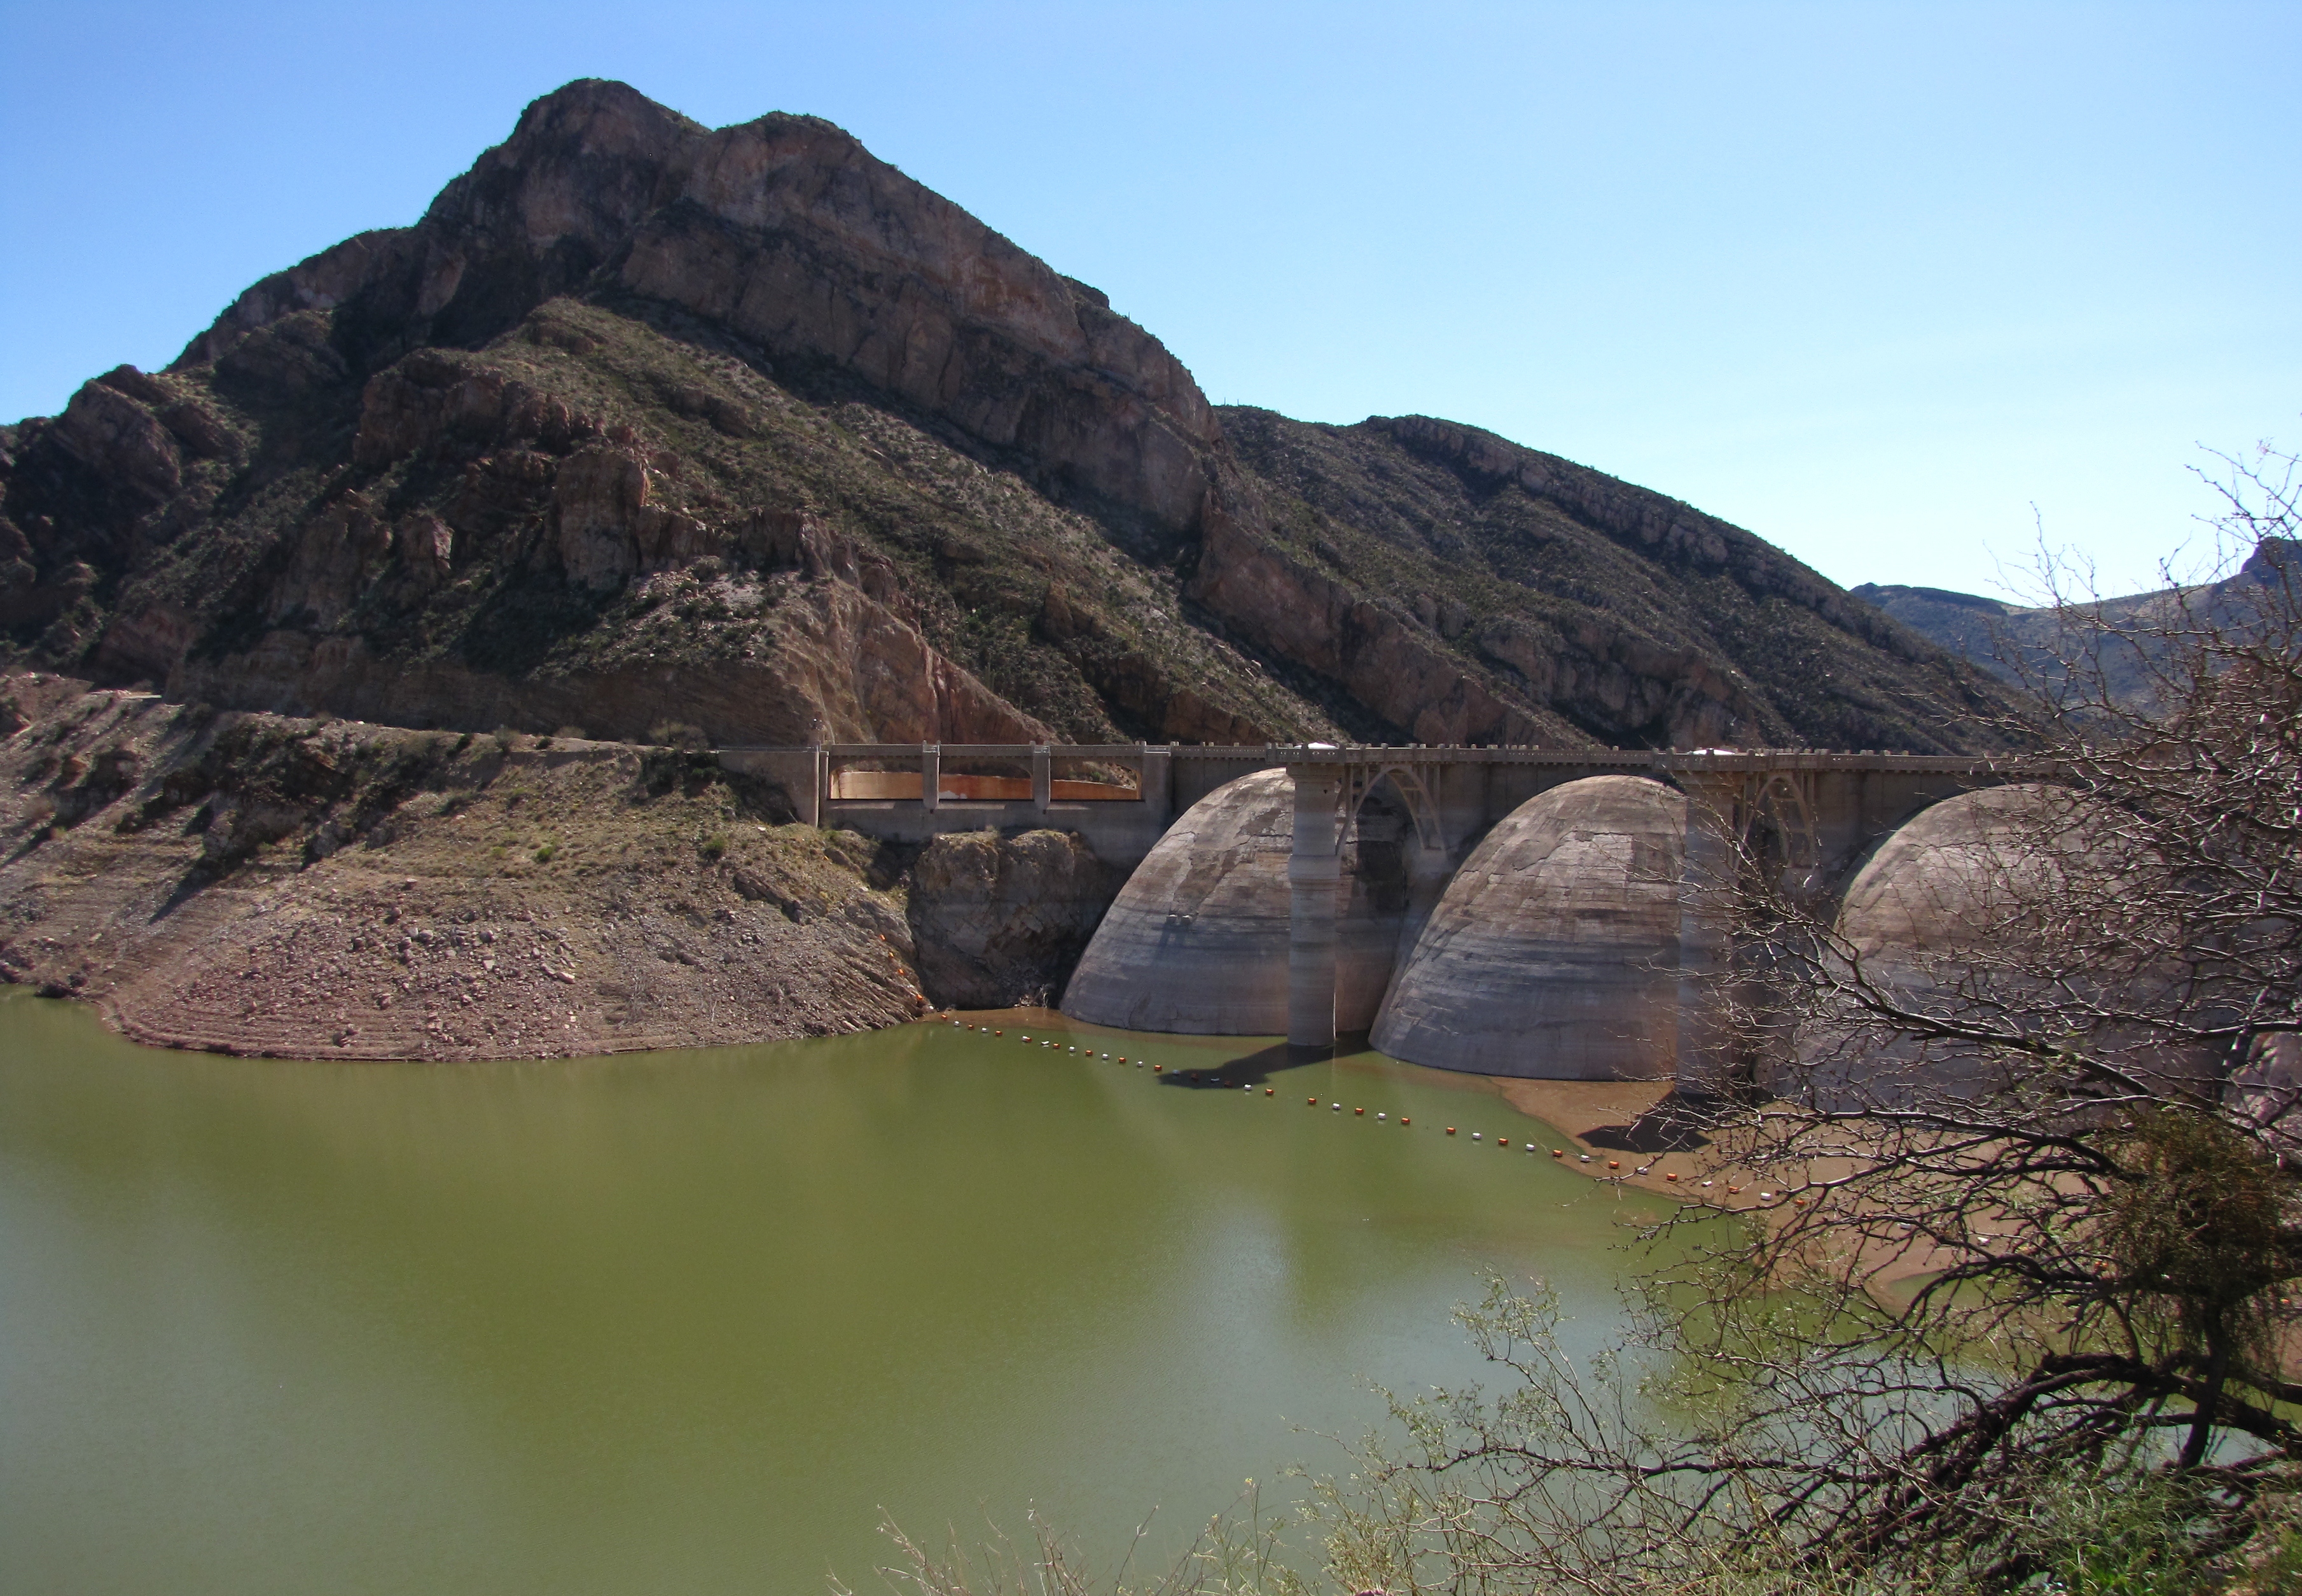 Coolidge Dam - Dedicated by Calvin Coolidge on March 4, 1930